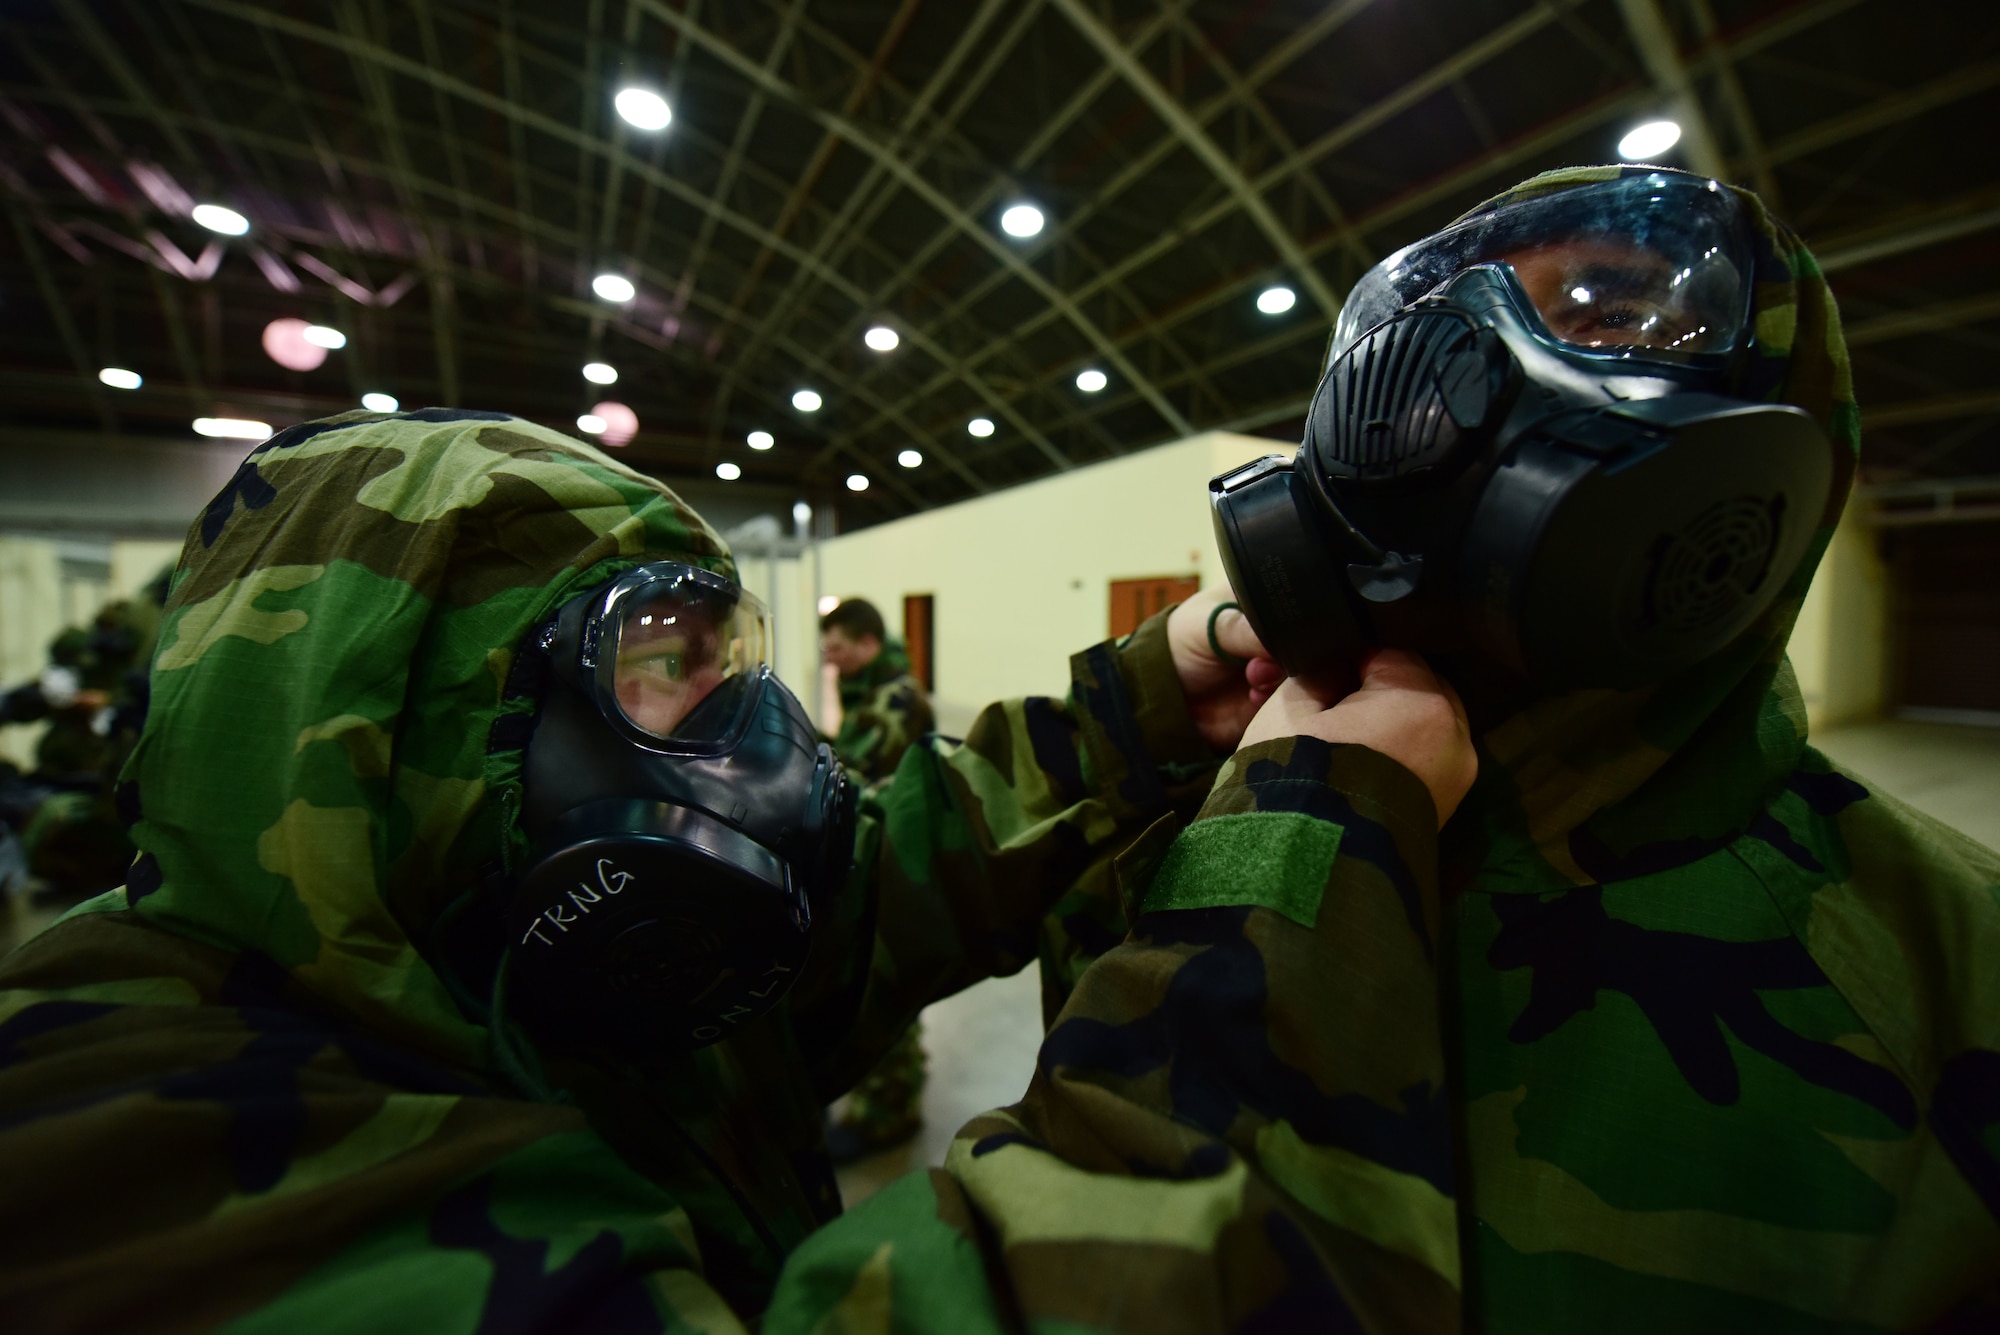 Airmen don M50 gas masks during Ability to Survive and Operate training May 24, 2019, at Incirlik Air Base, Turkey. The M50 gas mask is designed to protect against chemical, biological and radiological environments. (U.S. Air Force photo by Tech. Sgt. Jim Araos)